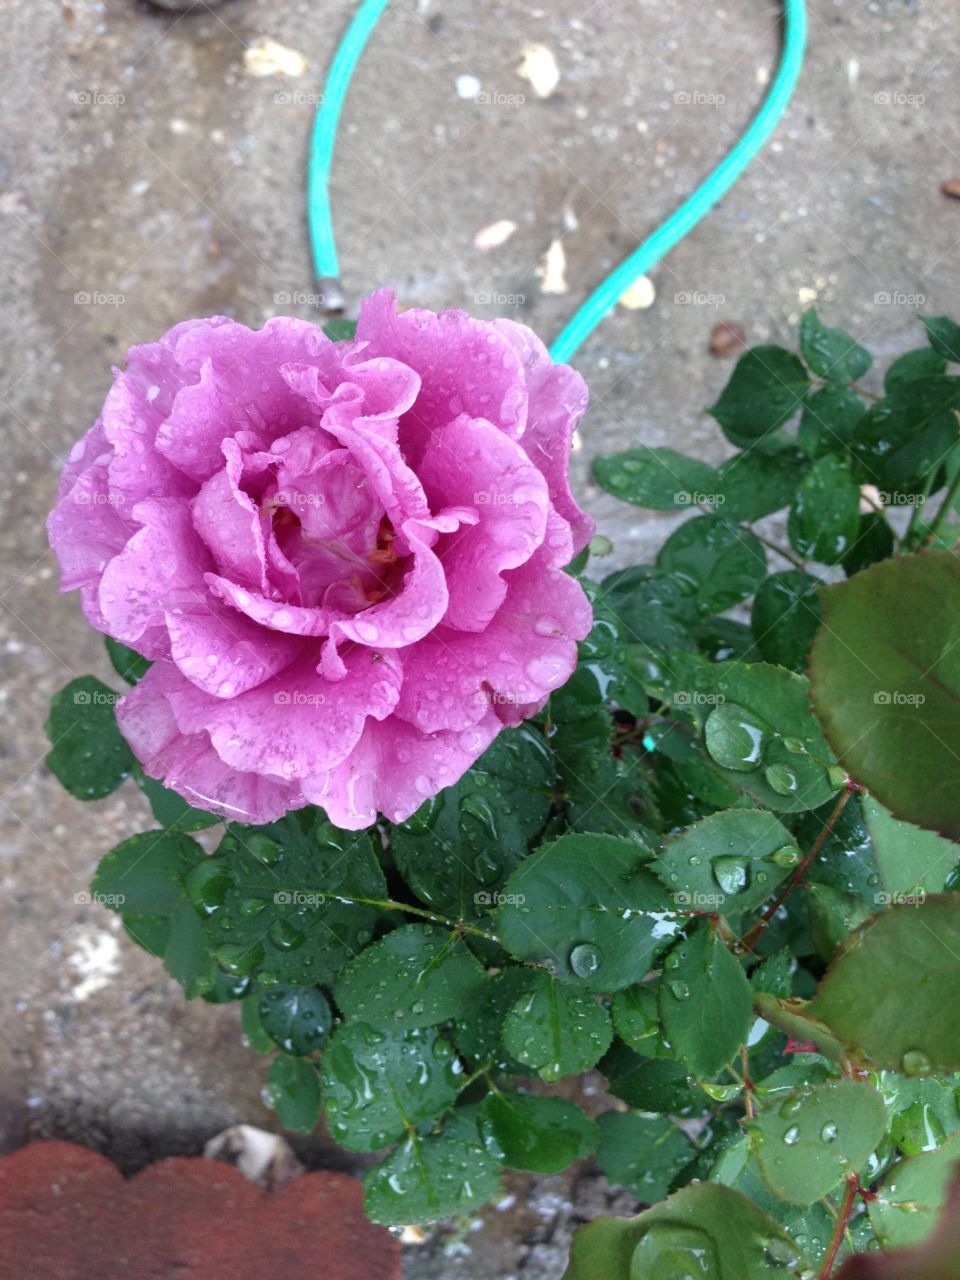 Rain brings life to each gentle flower, and leaves beads of water glistening on the delicate petals of a rare, lavender rose. 